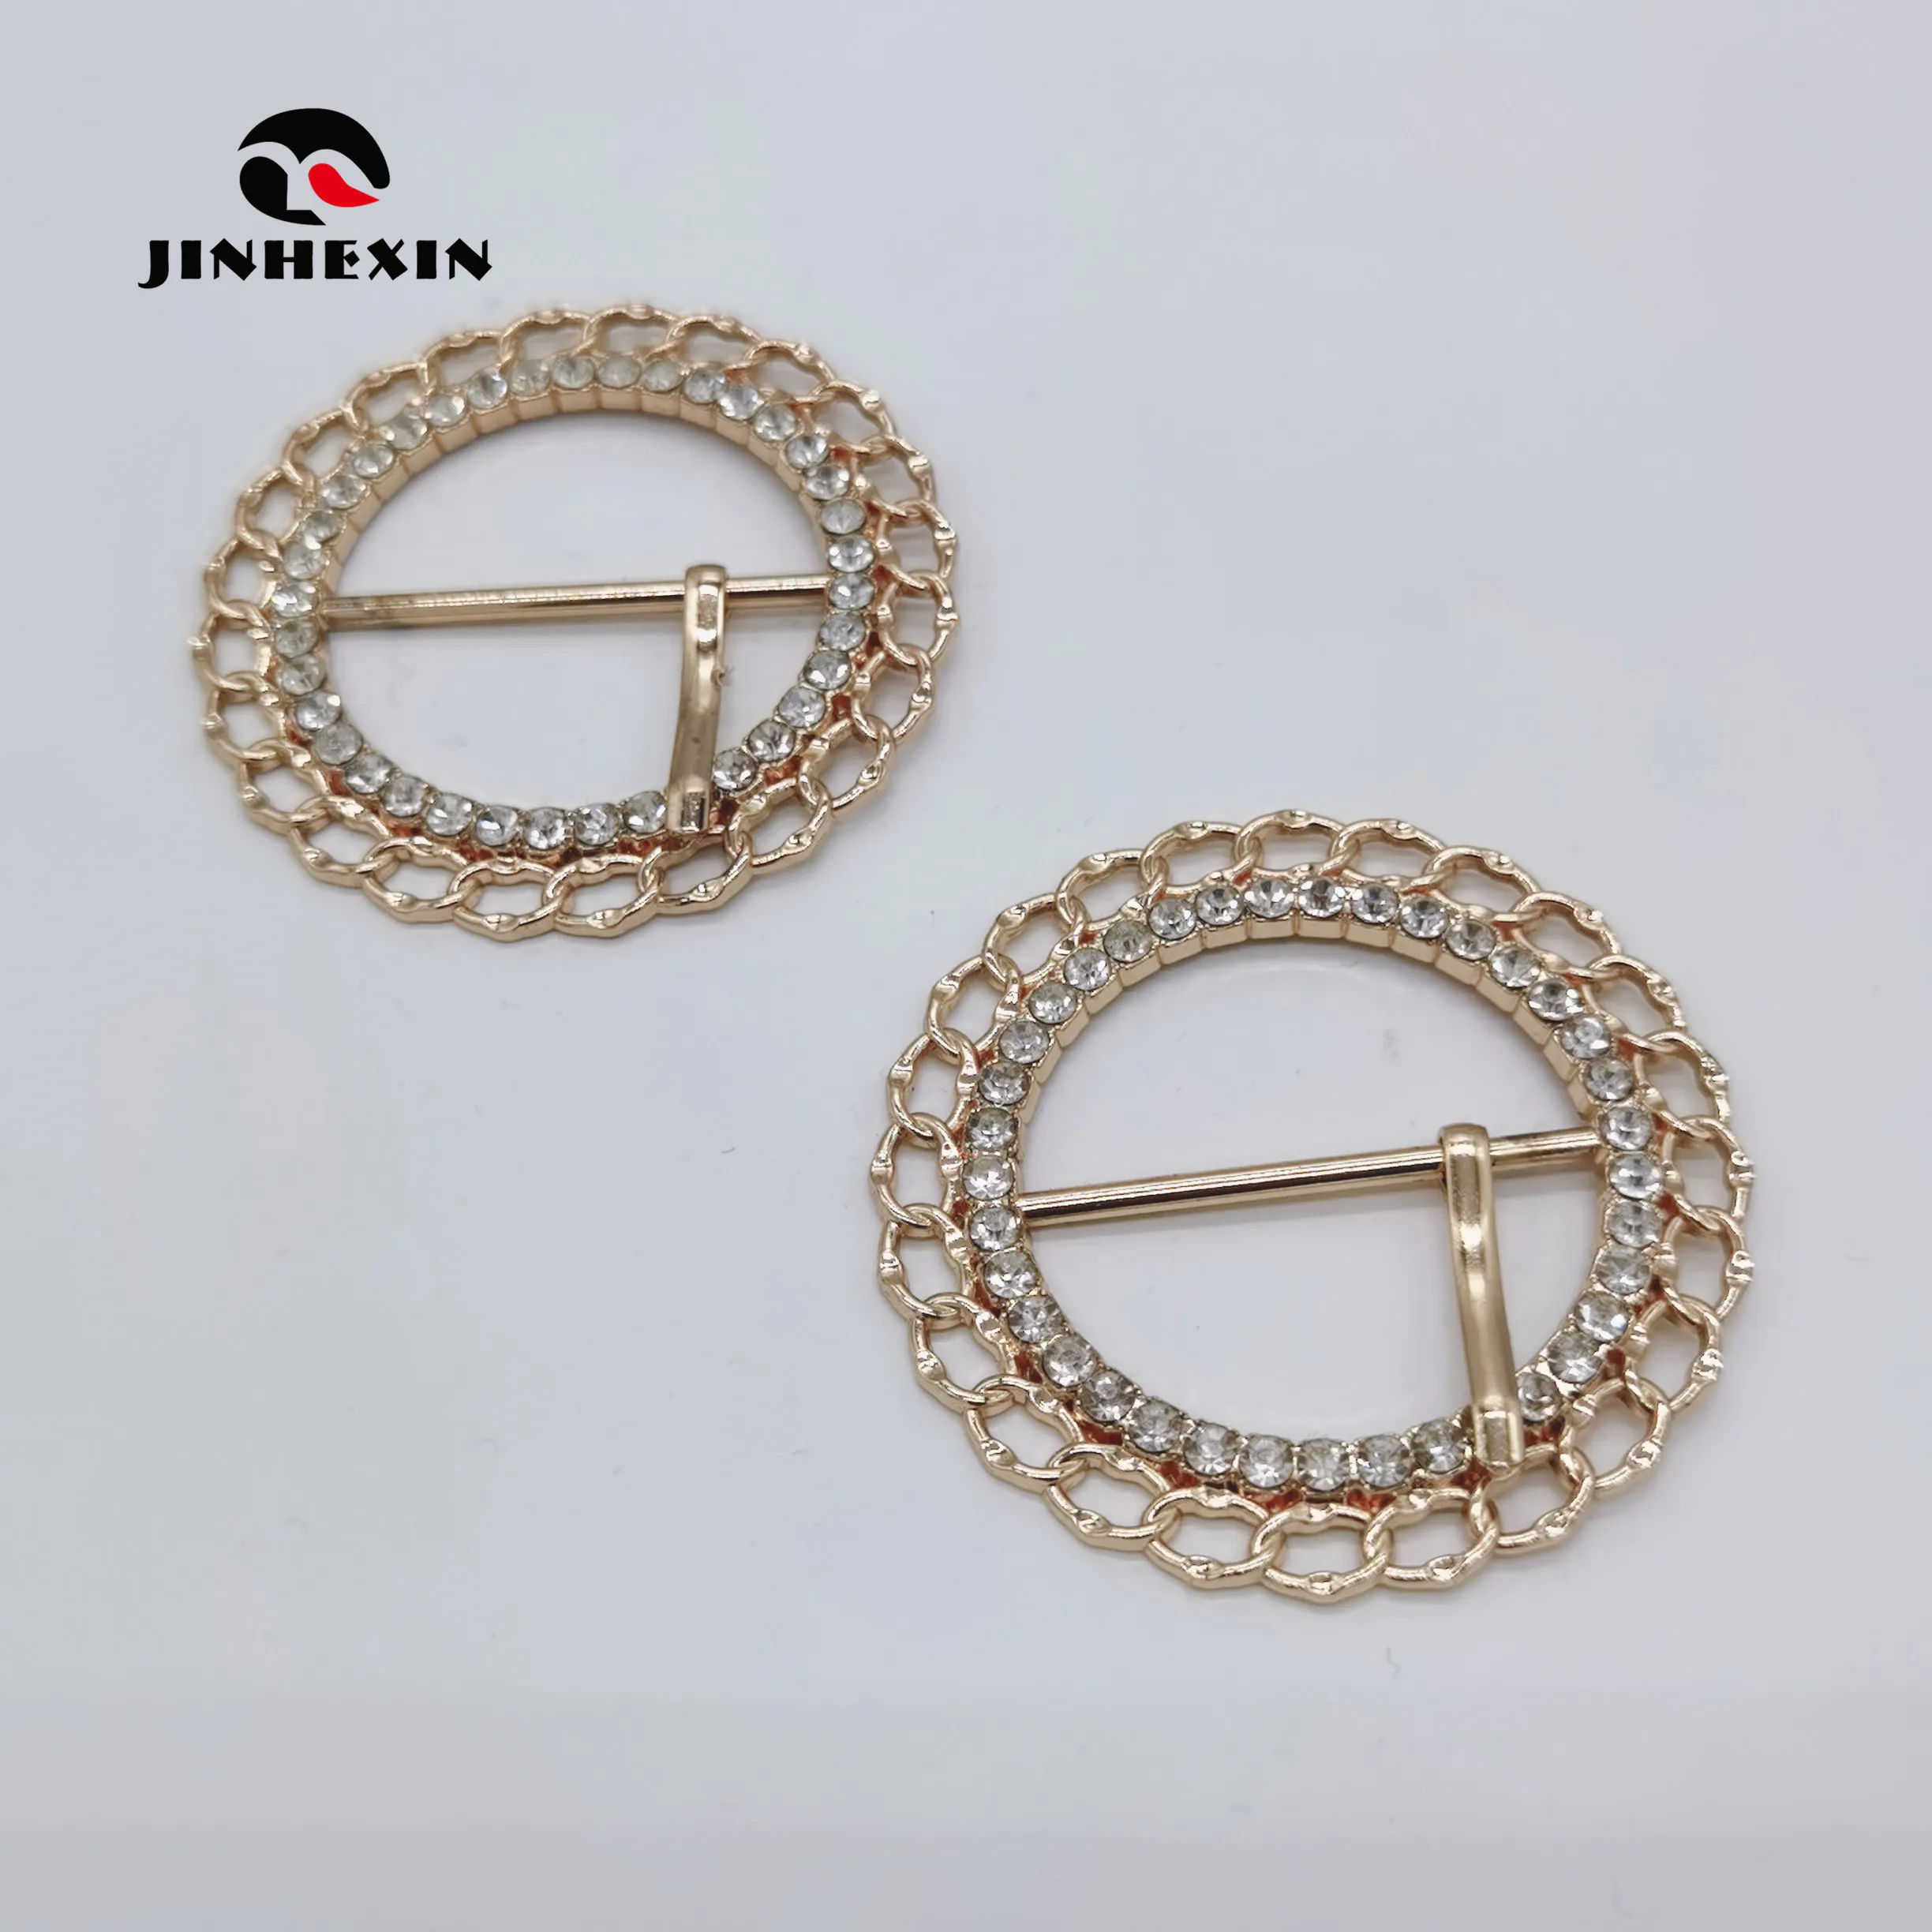 The Latest Fashion Zinc Alloy Pin Buckles Rhinestones Pin Buckle Manufacturers Shoe Buckles Metal